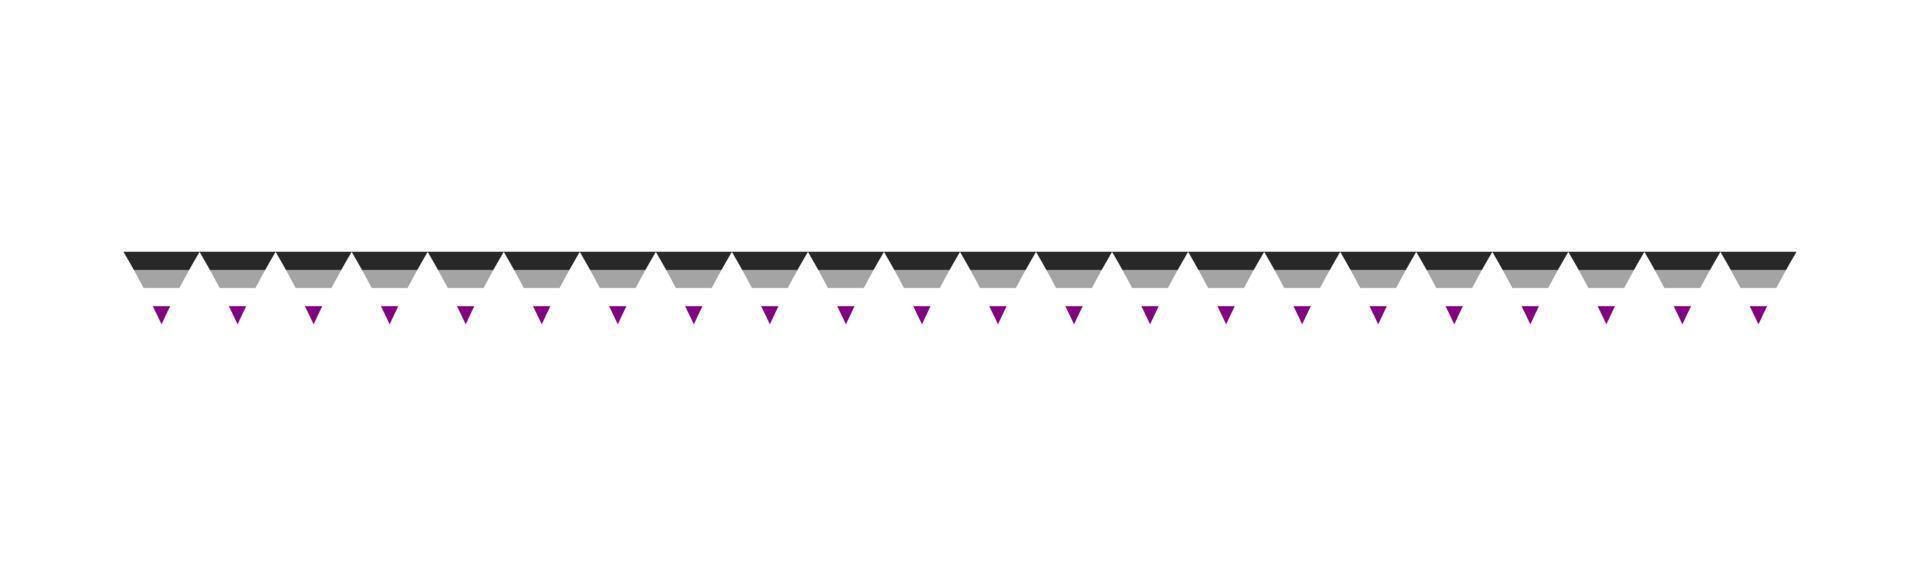 Asexual Flag Garland. Pride month bunting simple vector graphics.